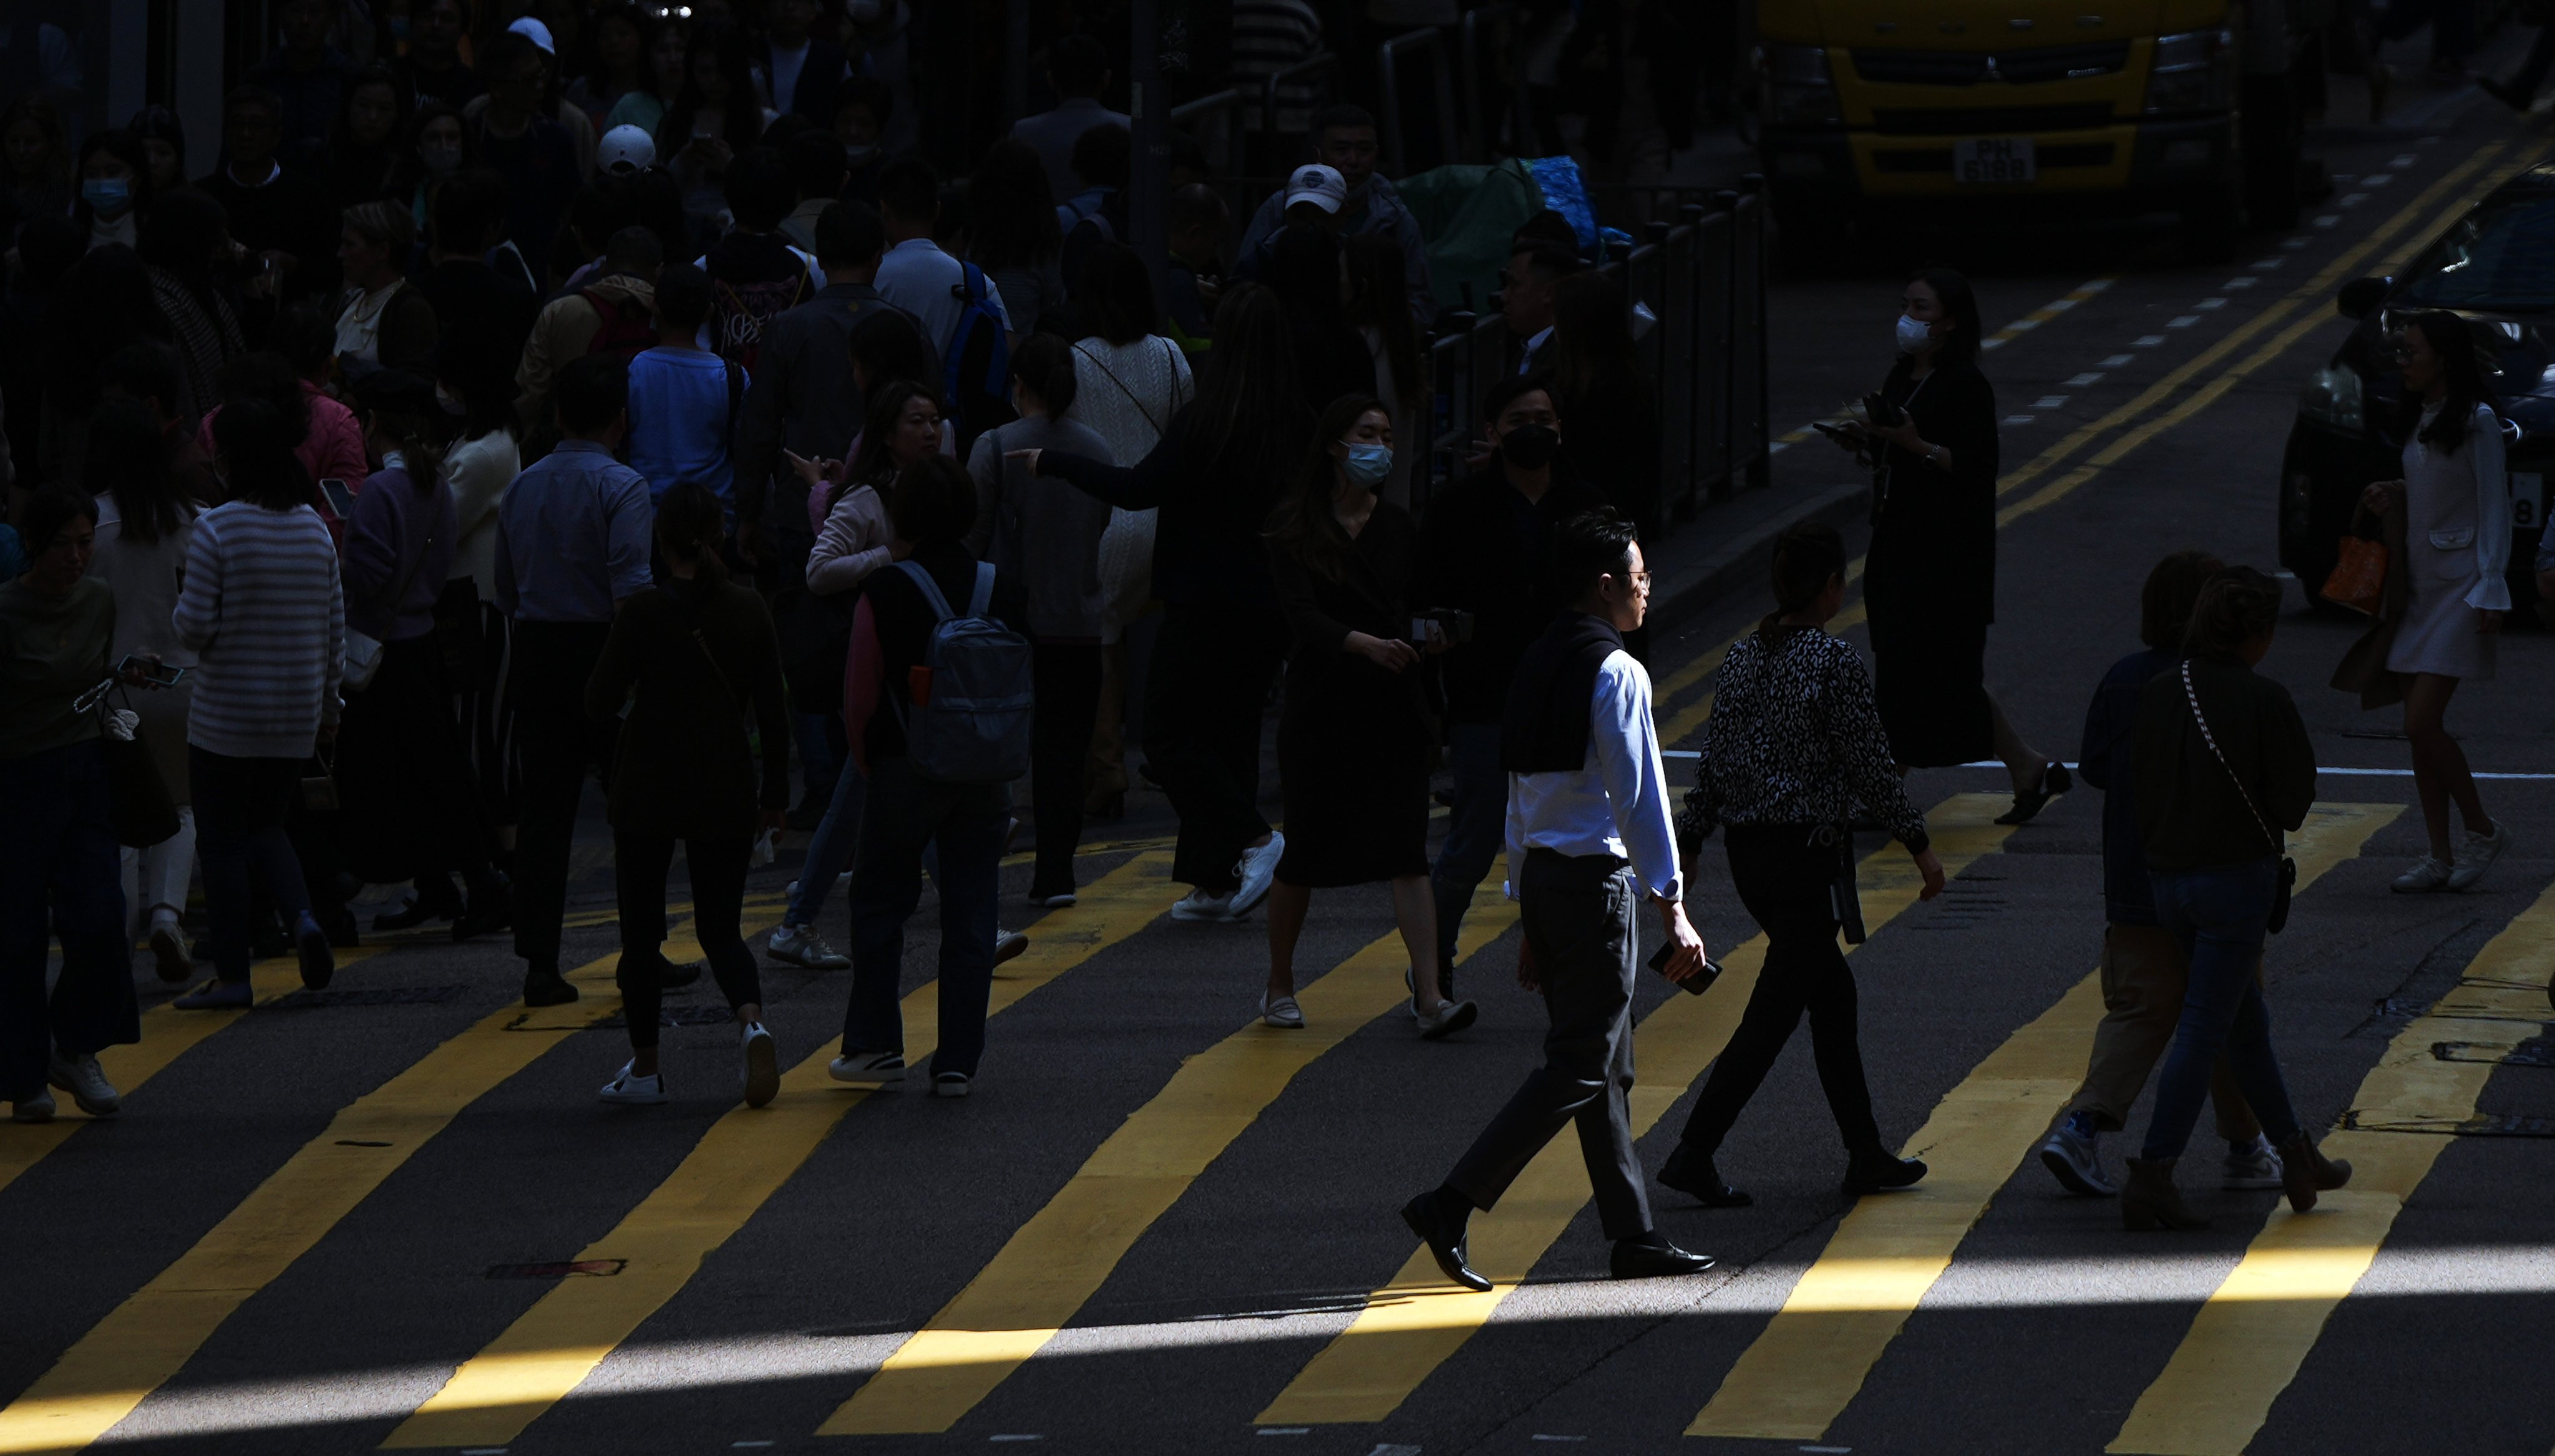 Pedestrians in Central. One expert has called for government incentives to help company transition to new ways of working. Photo: Eugene Lee